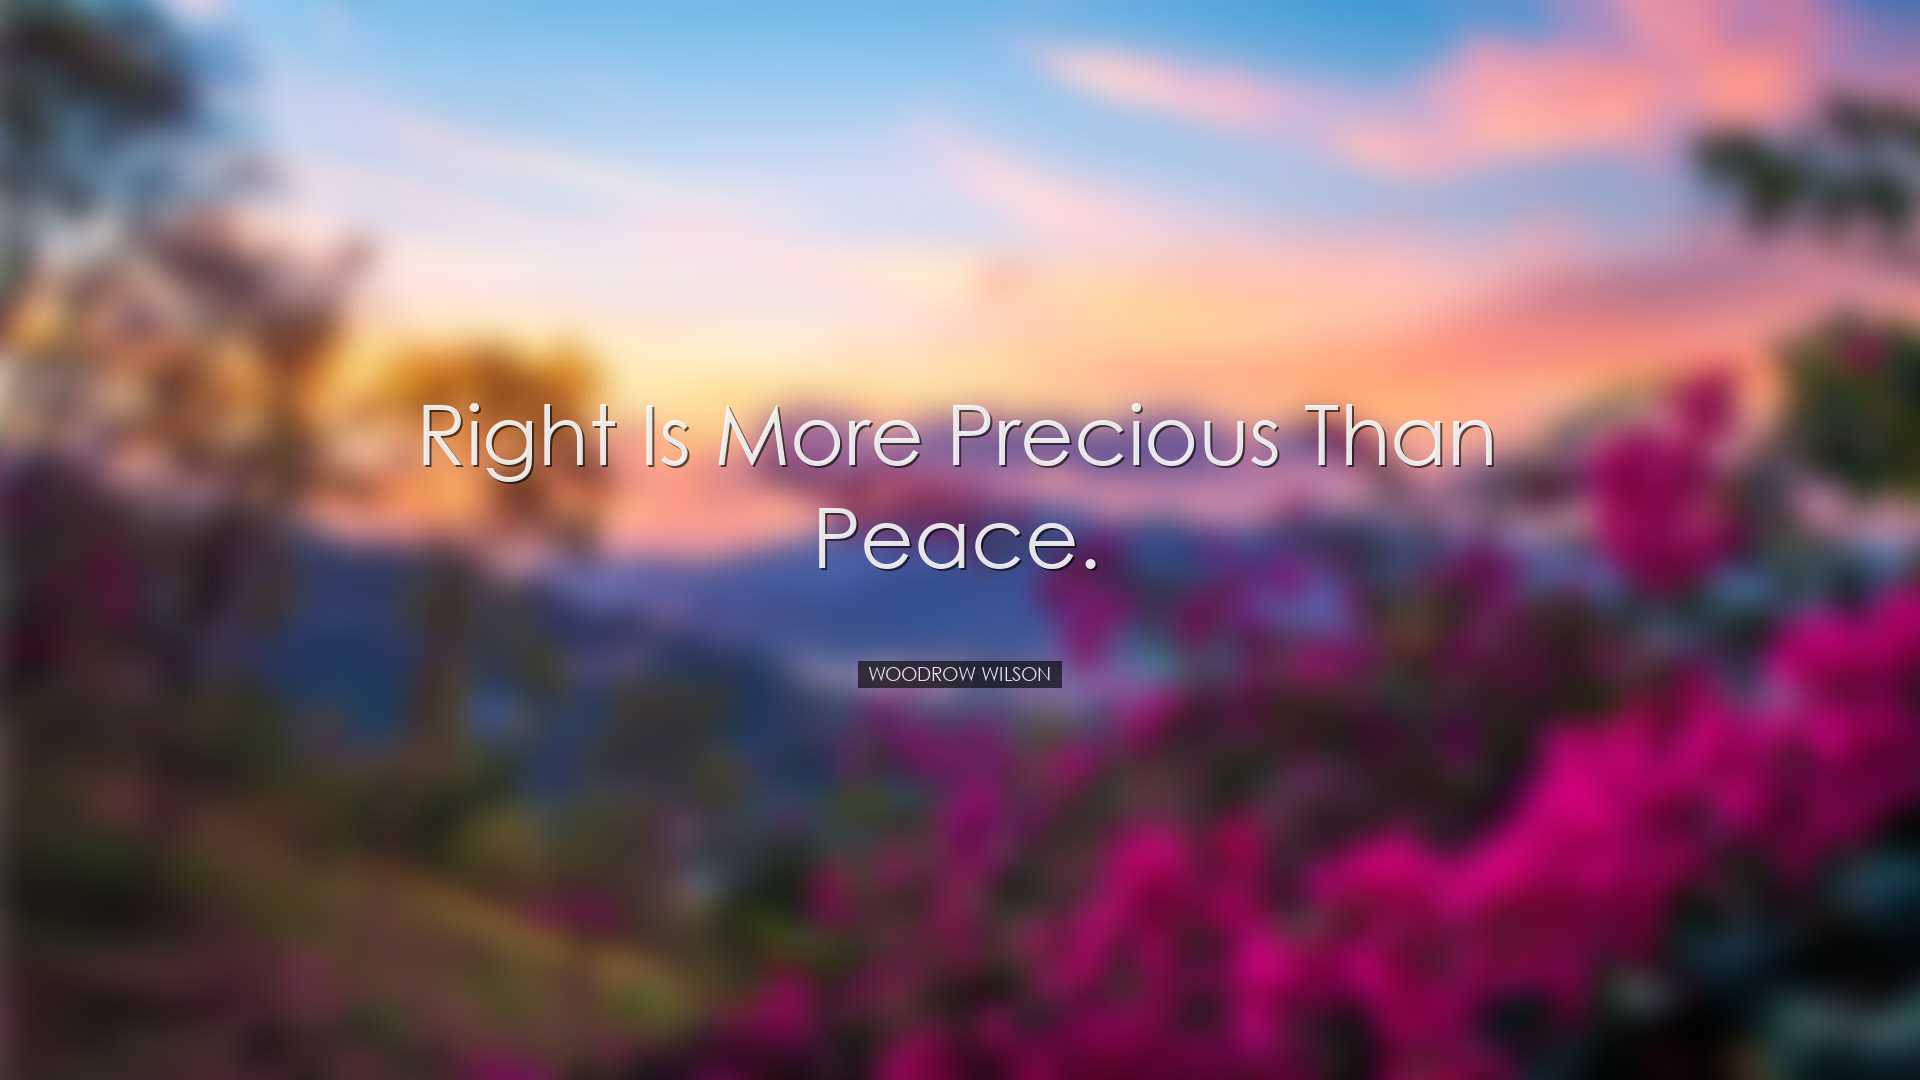 Right is more precious than peace. - Woodrow Wilson